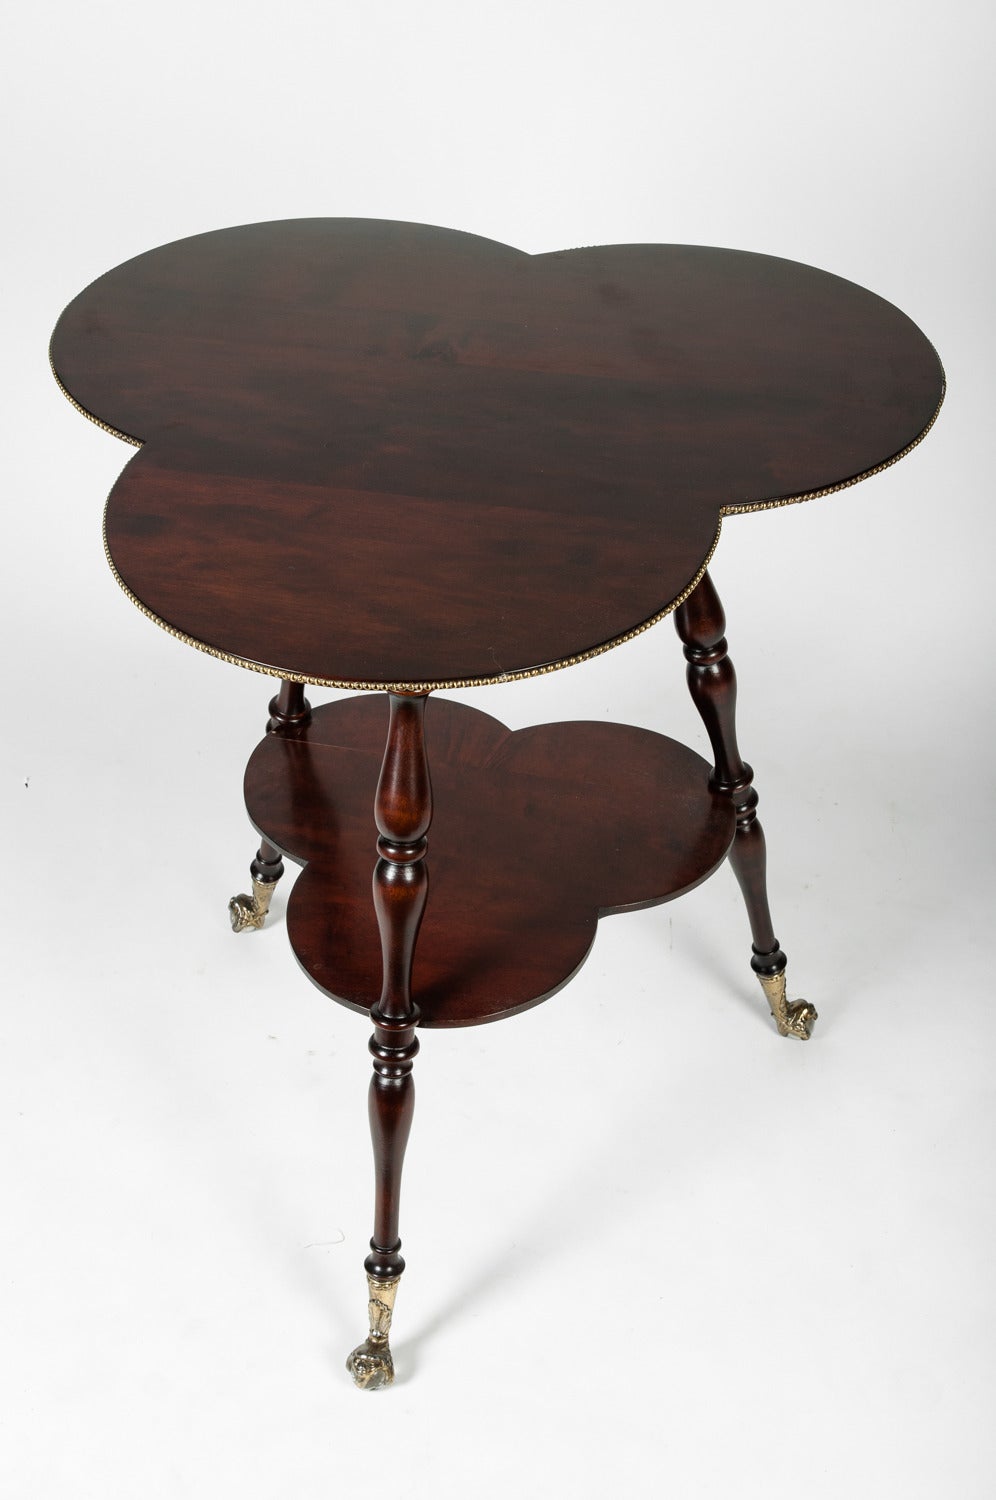 An antique English trefoil clover leaf side table wit bottom shelf and turned legs.